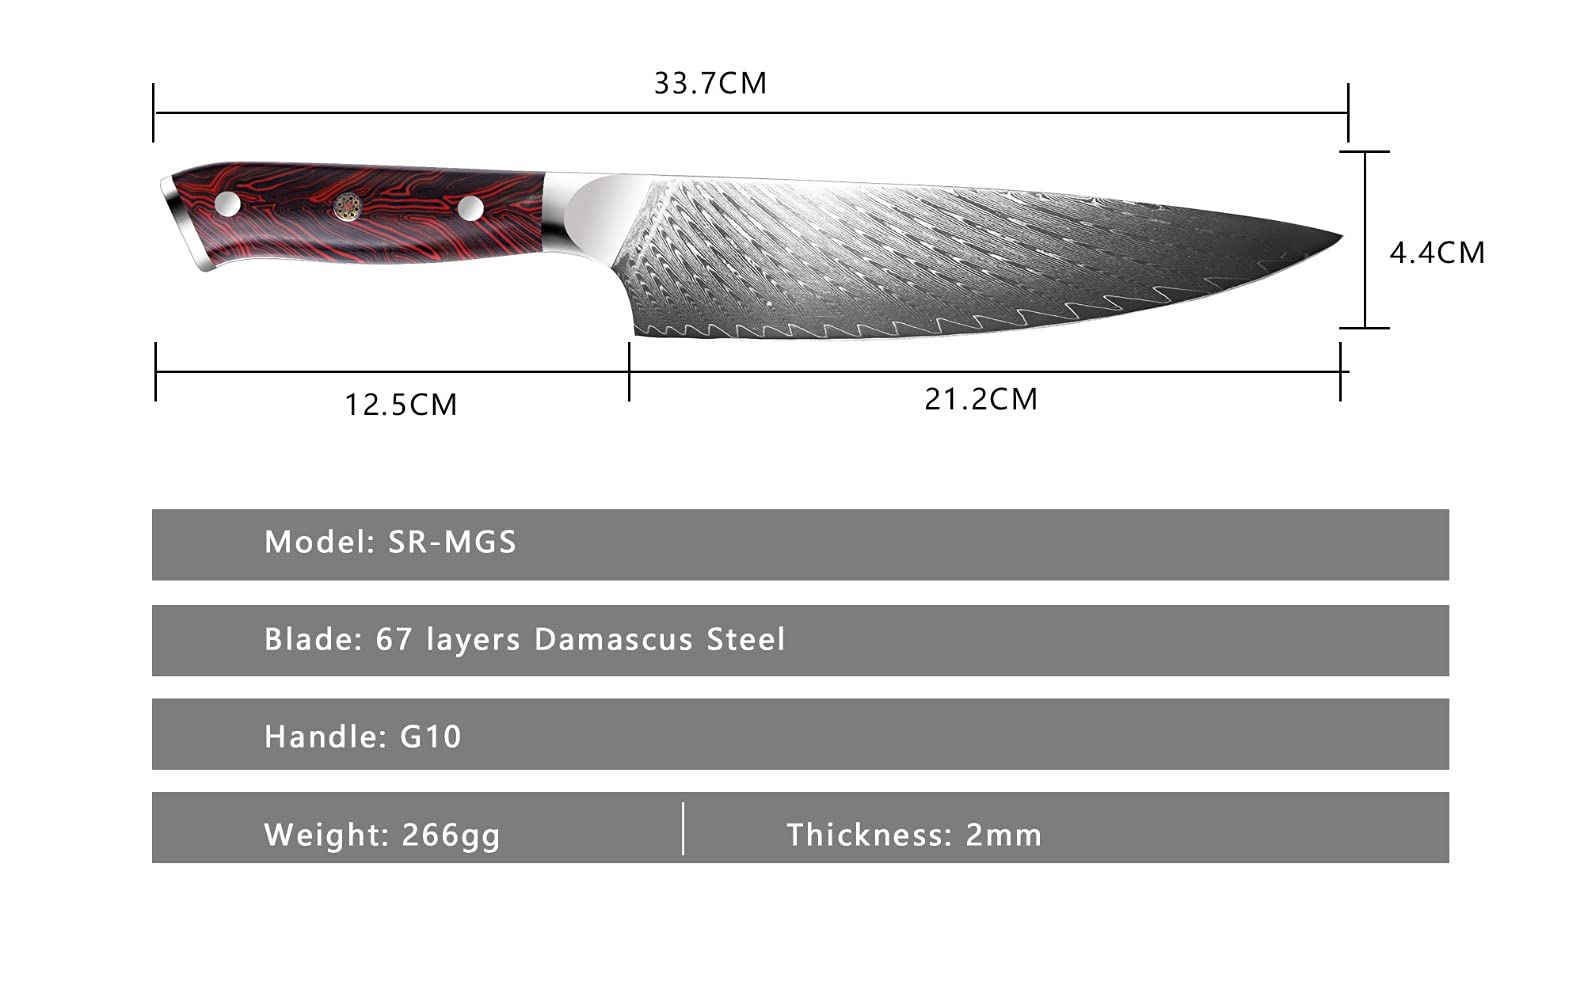 KEENSUN Damascus Chef Knife - 8 Inch Professiona Kitchen Knife Rust Resistant Japanese VG10 Super Steel 67 Layer High Carbon Stainless,with Red Ergonomic Resin Handle and Luxury Gift Box